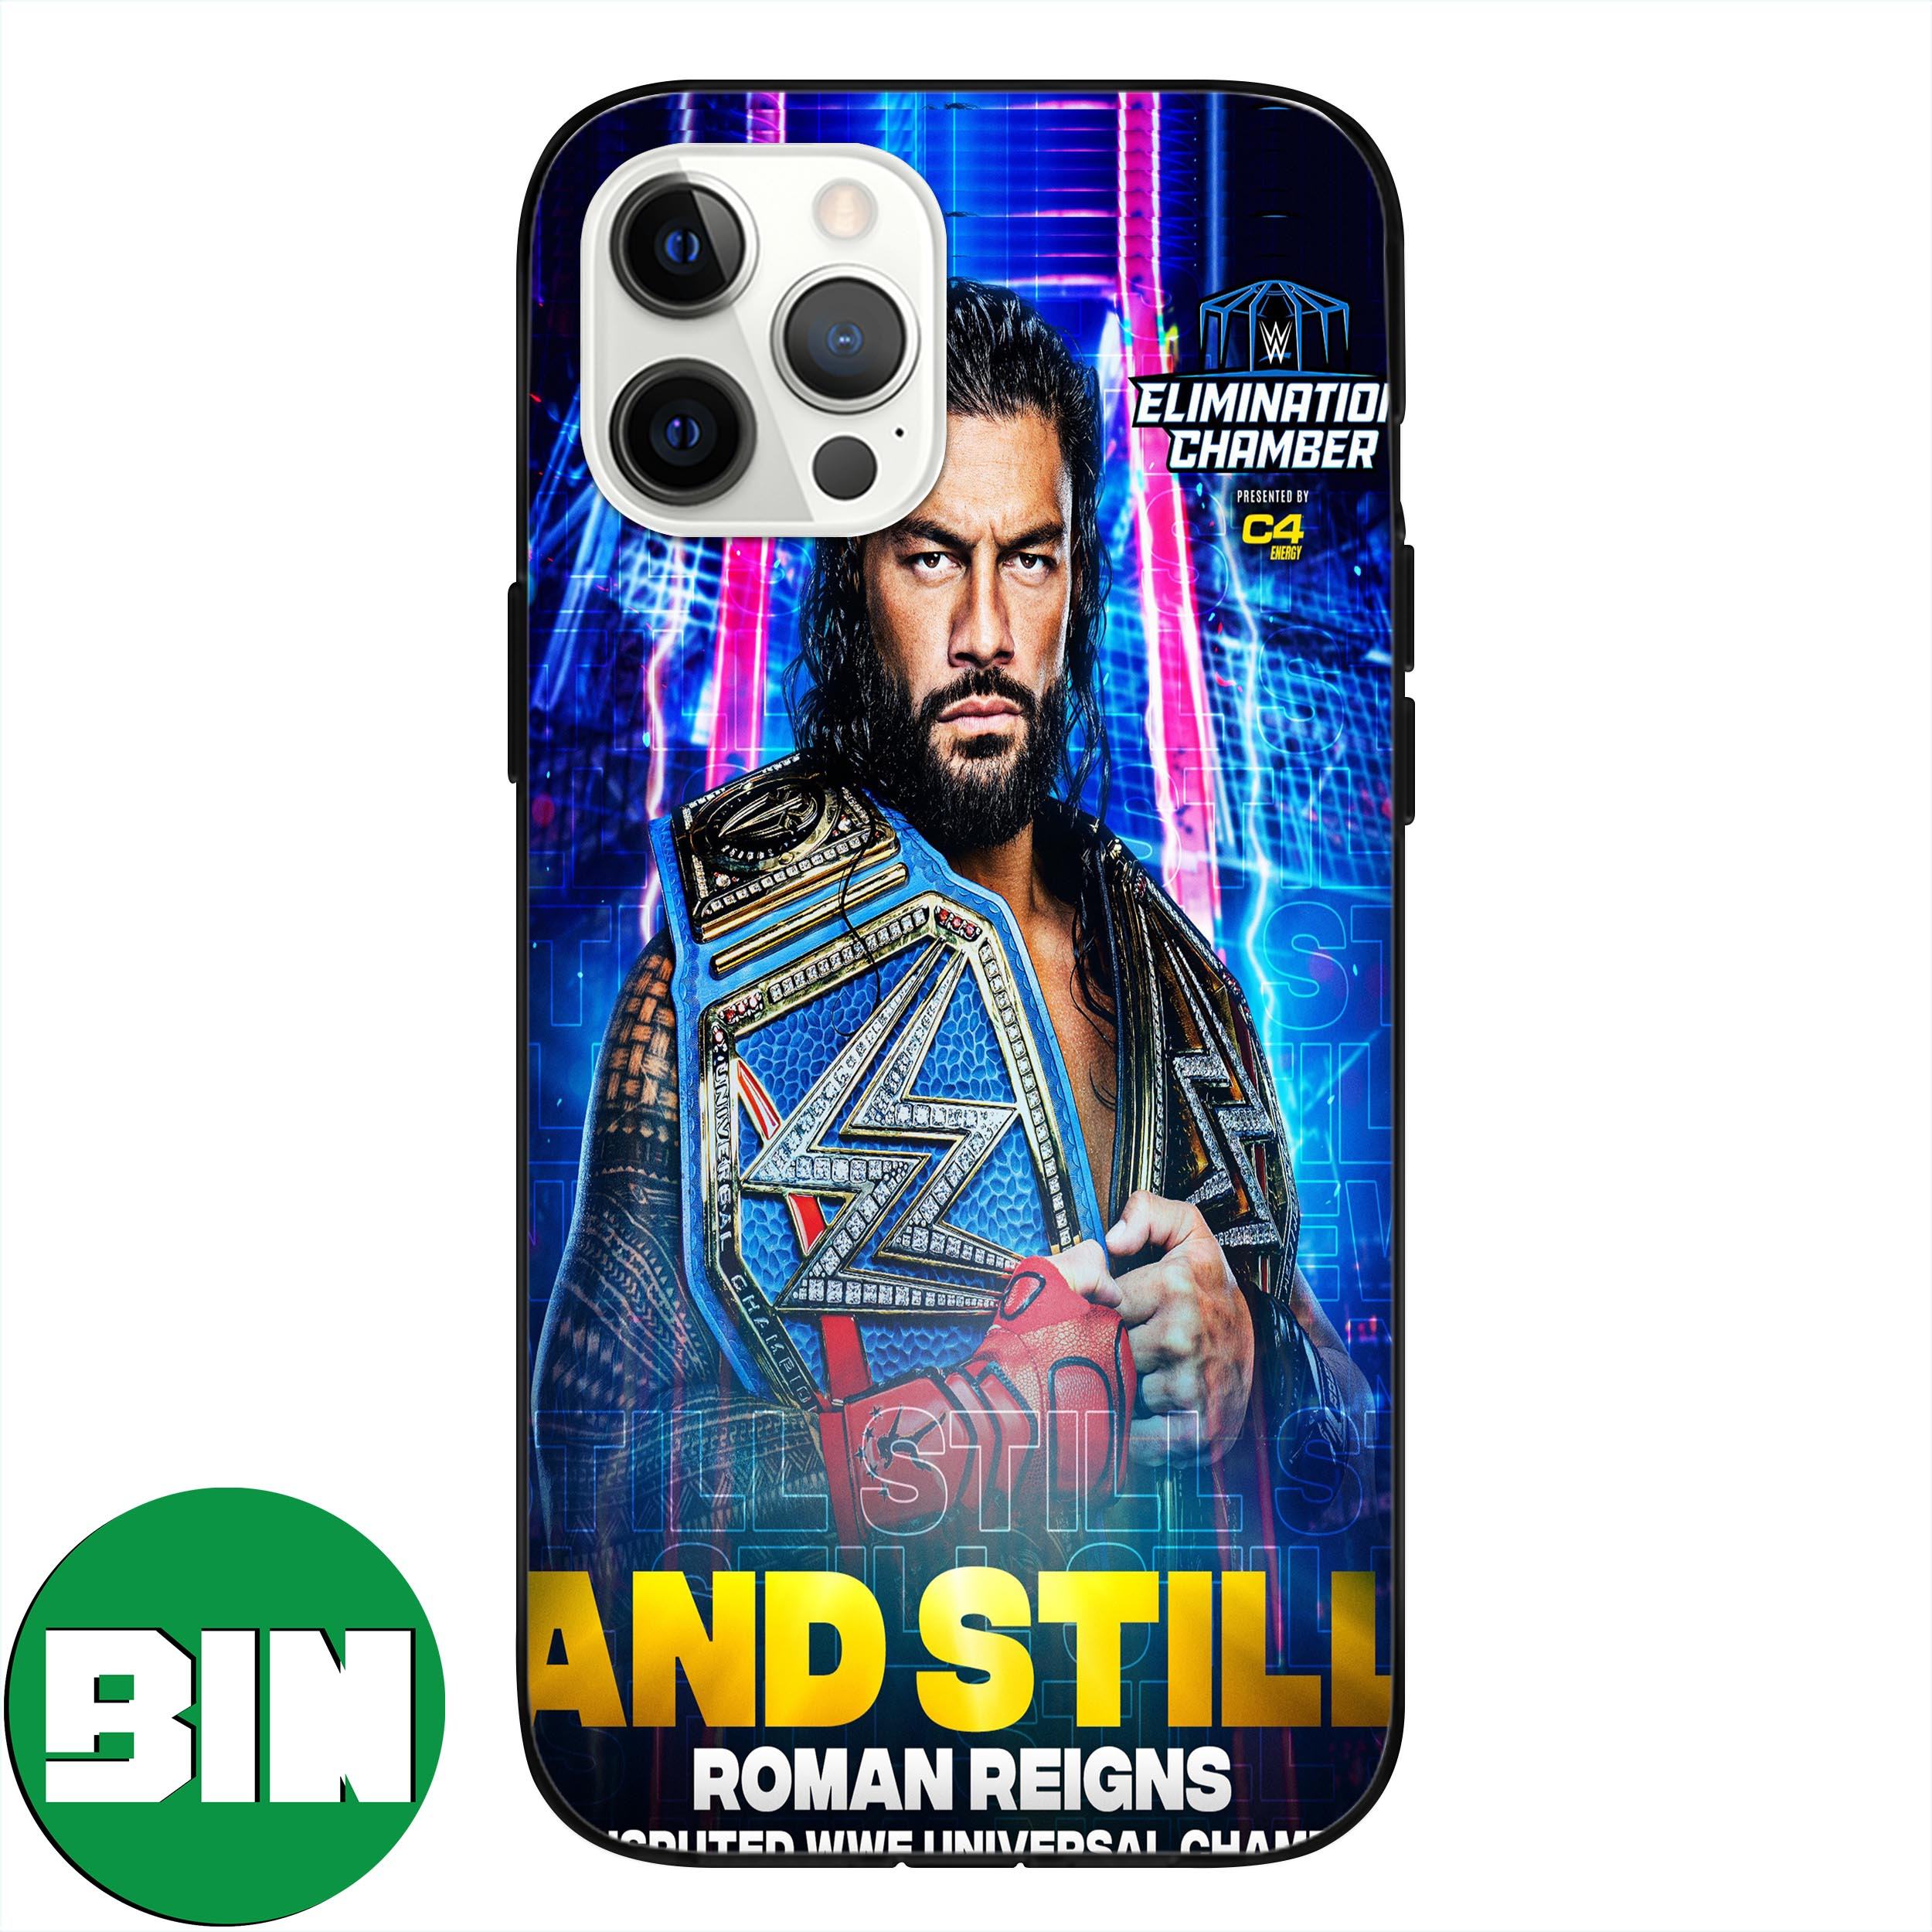 Roman Reigns Undisputed WWE Universal Champion WWE Wrestle Mania - And Still Phone Case